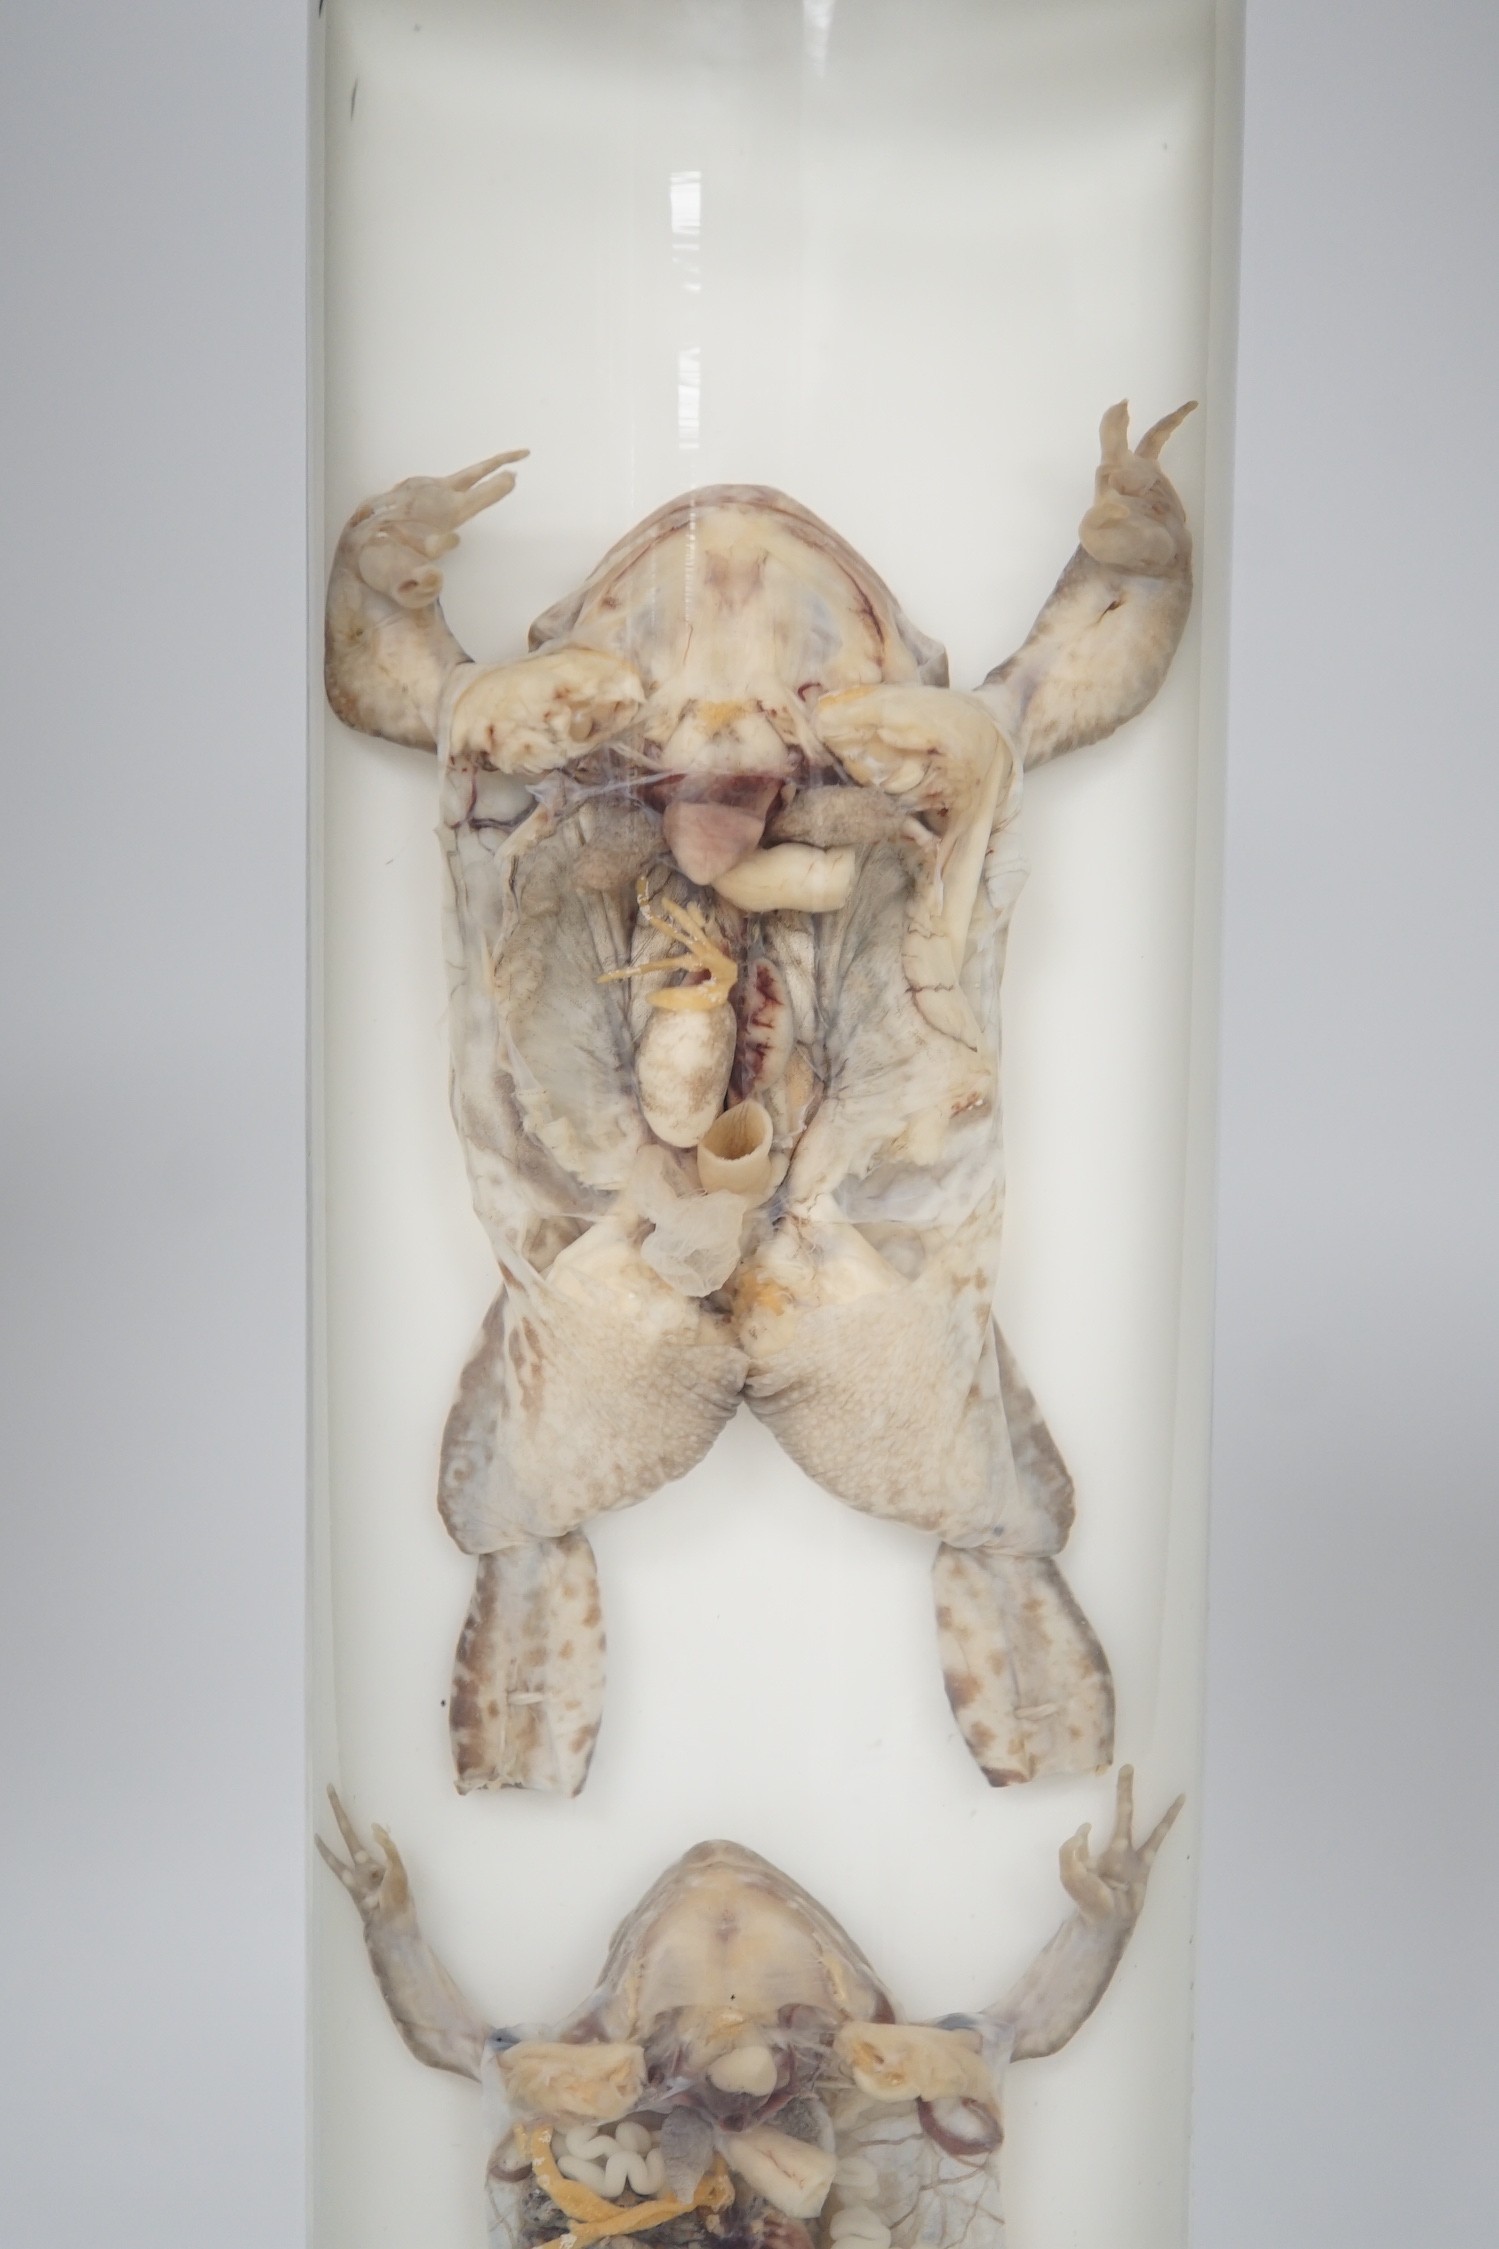 A biological specimen - Rana Temporaria (Common frog) reproductive systems, male and female forms, - Image 2 of 4